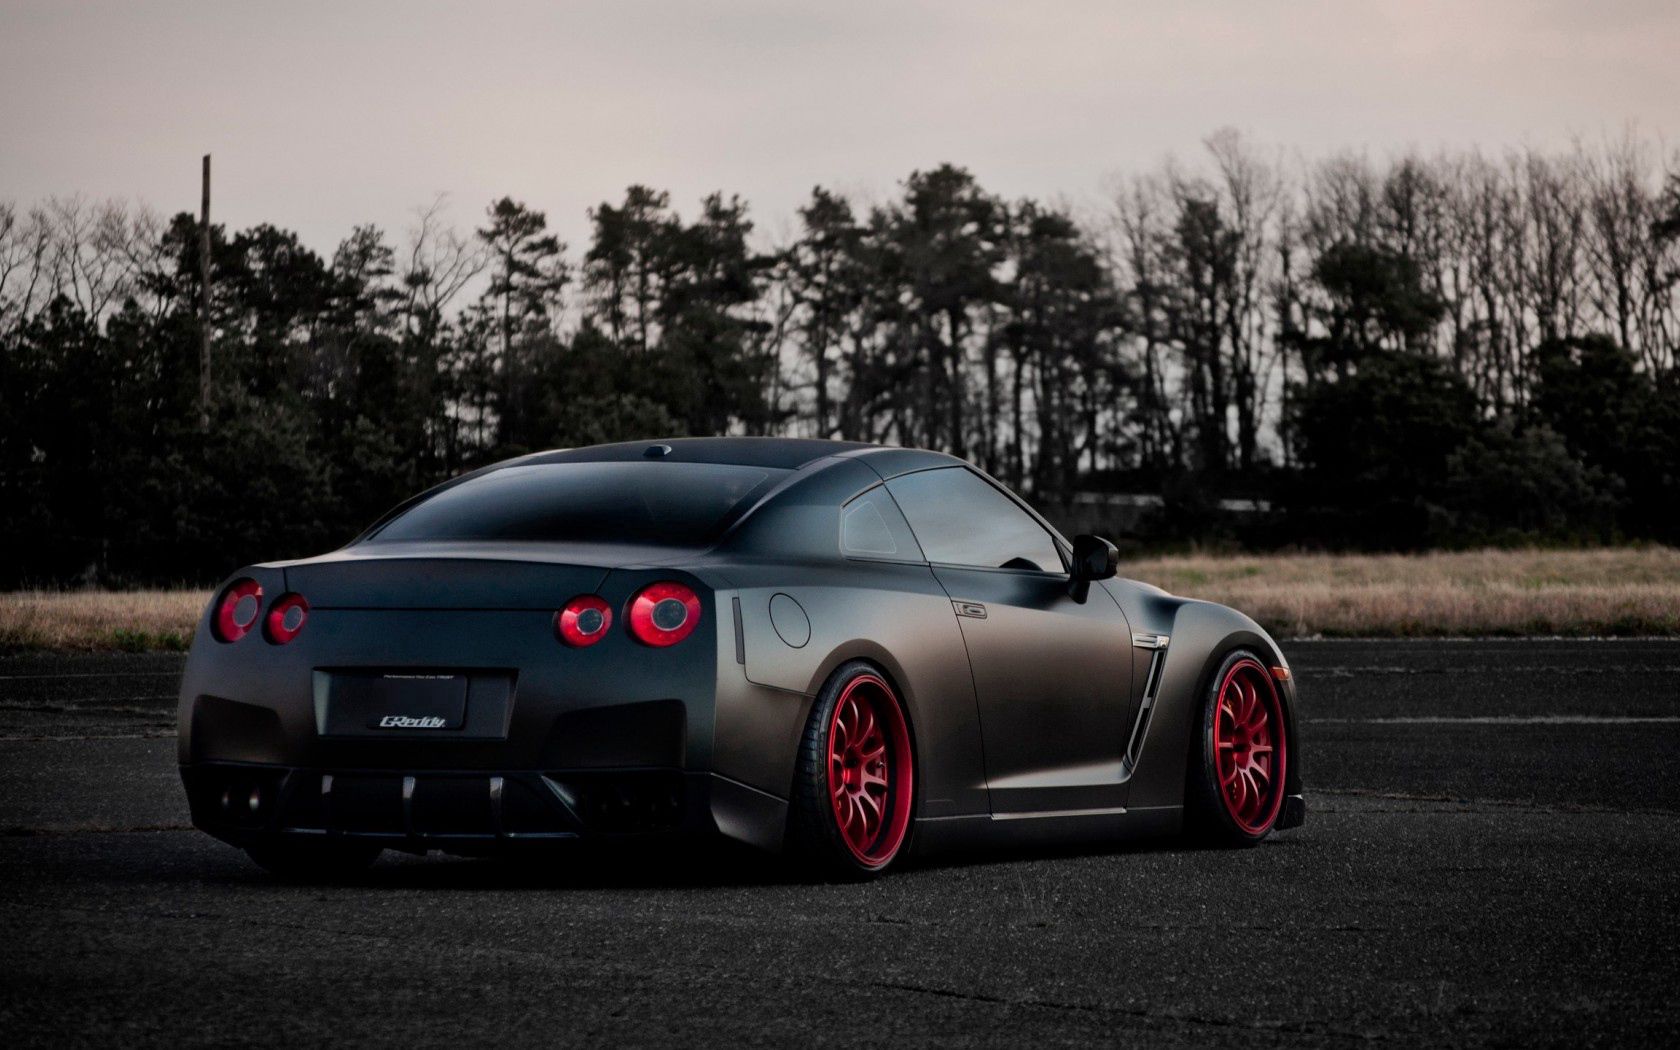 Popular Gt-R Image for Phone